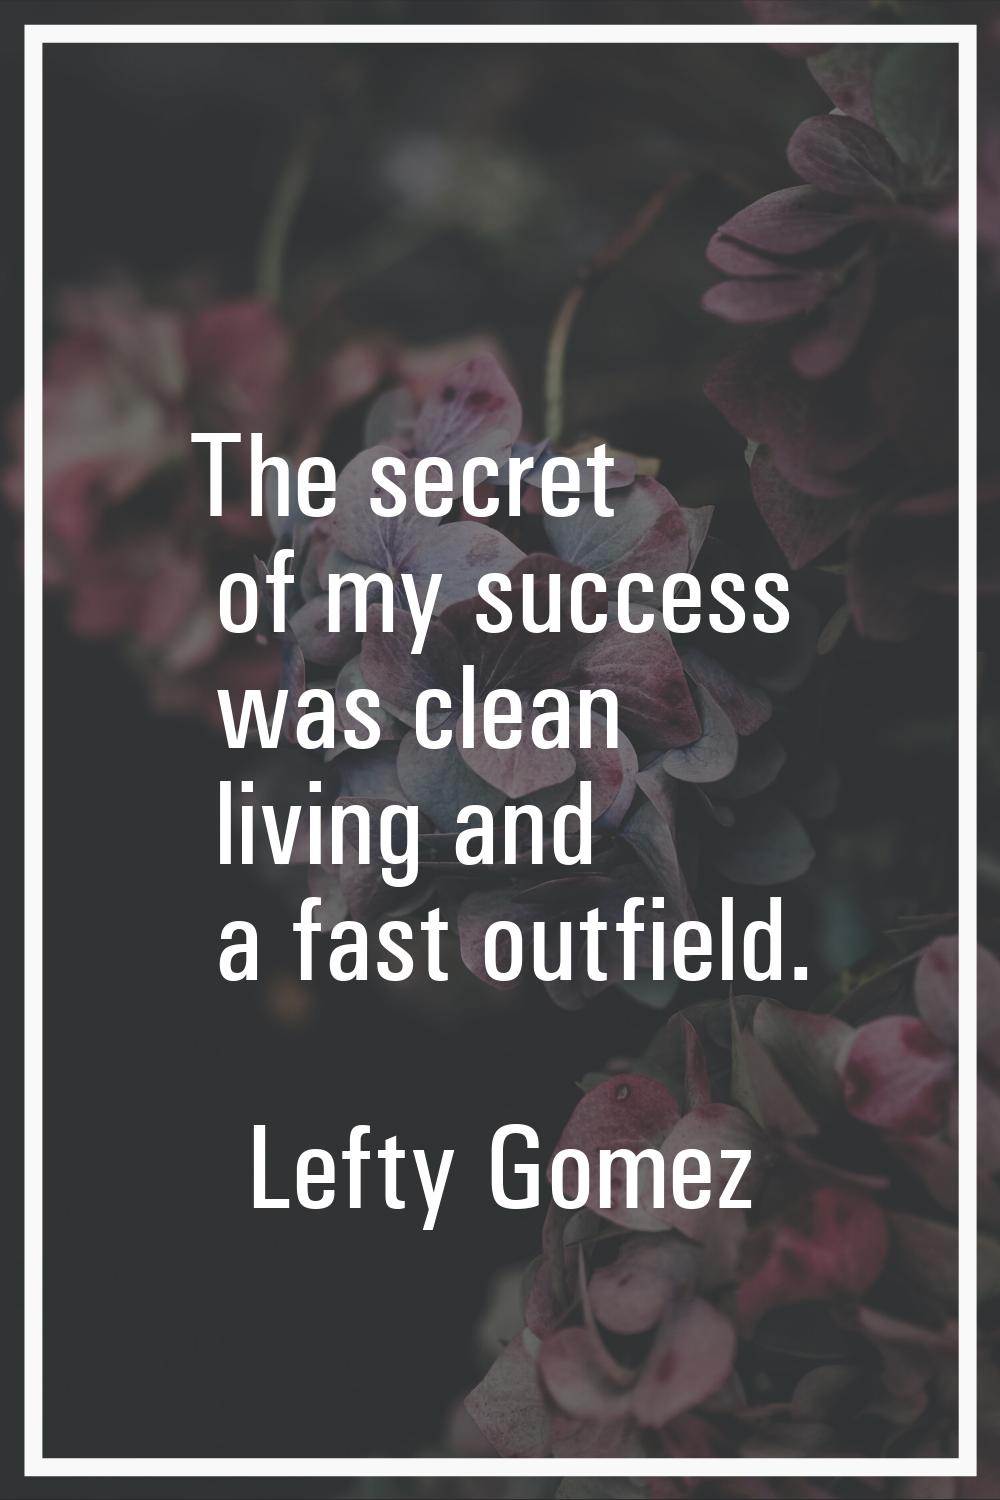 The secret of my success was clean living and a fast outfield.